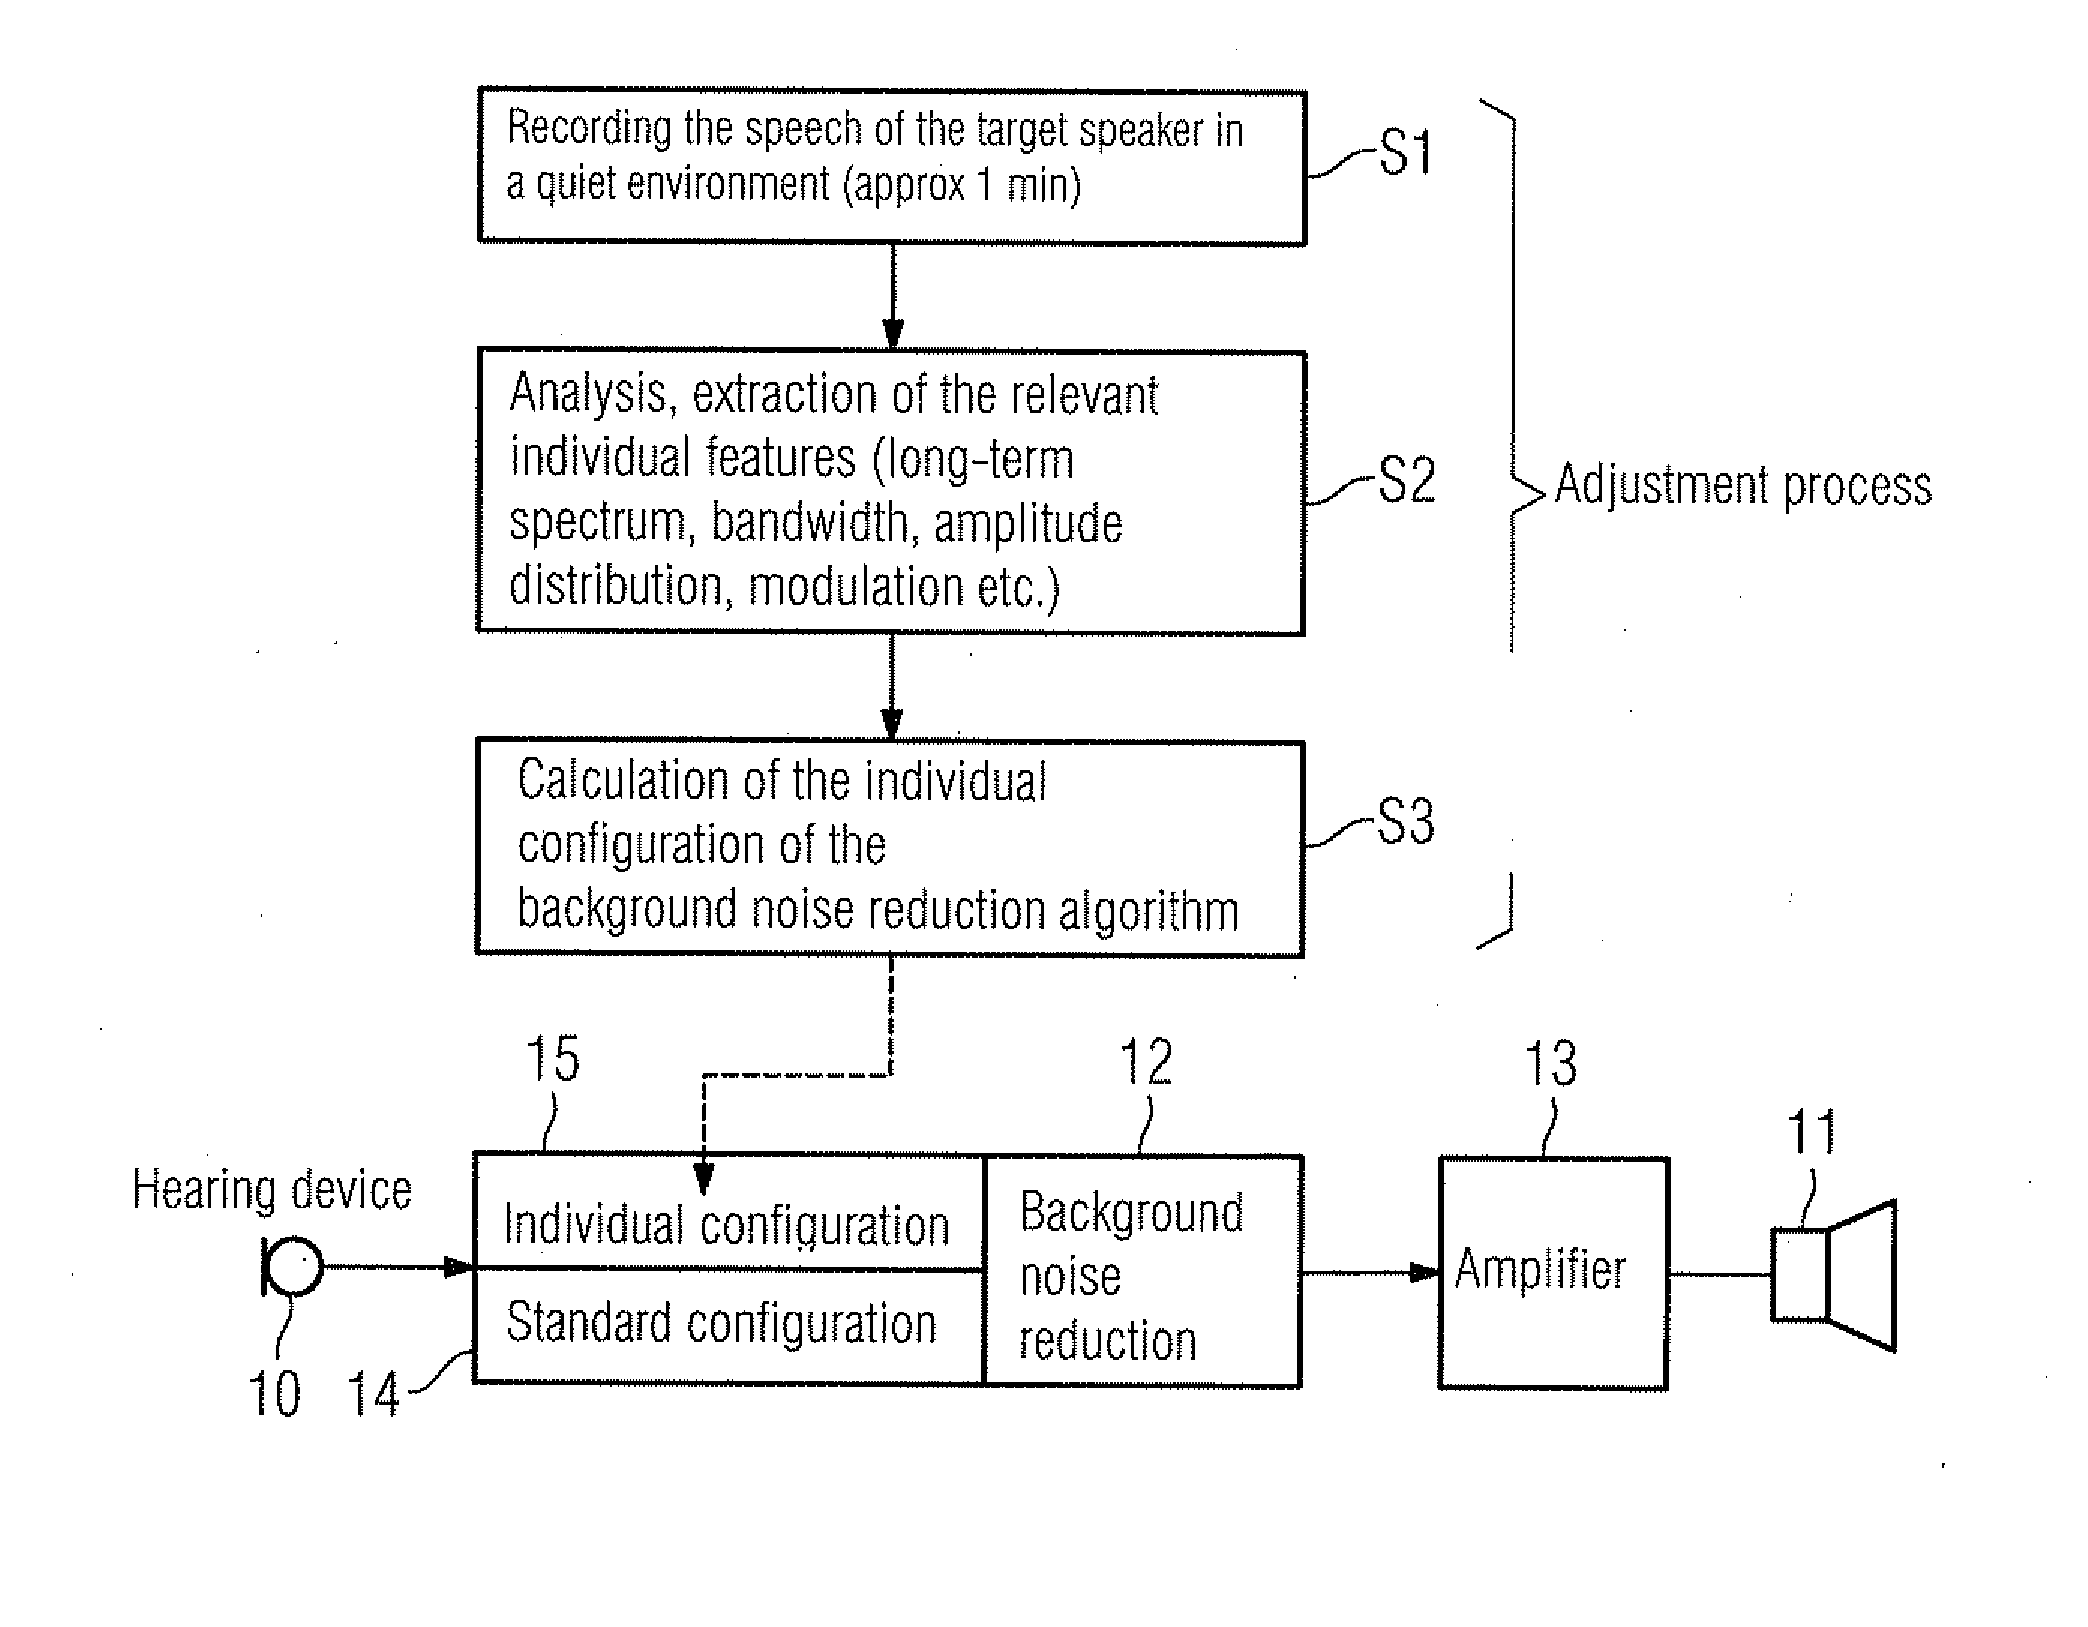 Adjusting a hearing apparatus to a speech signal